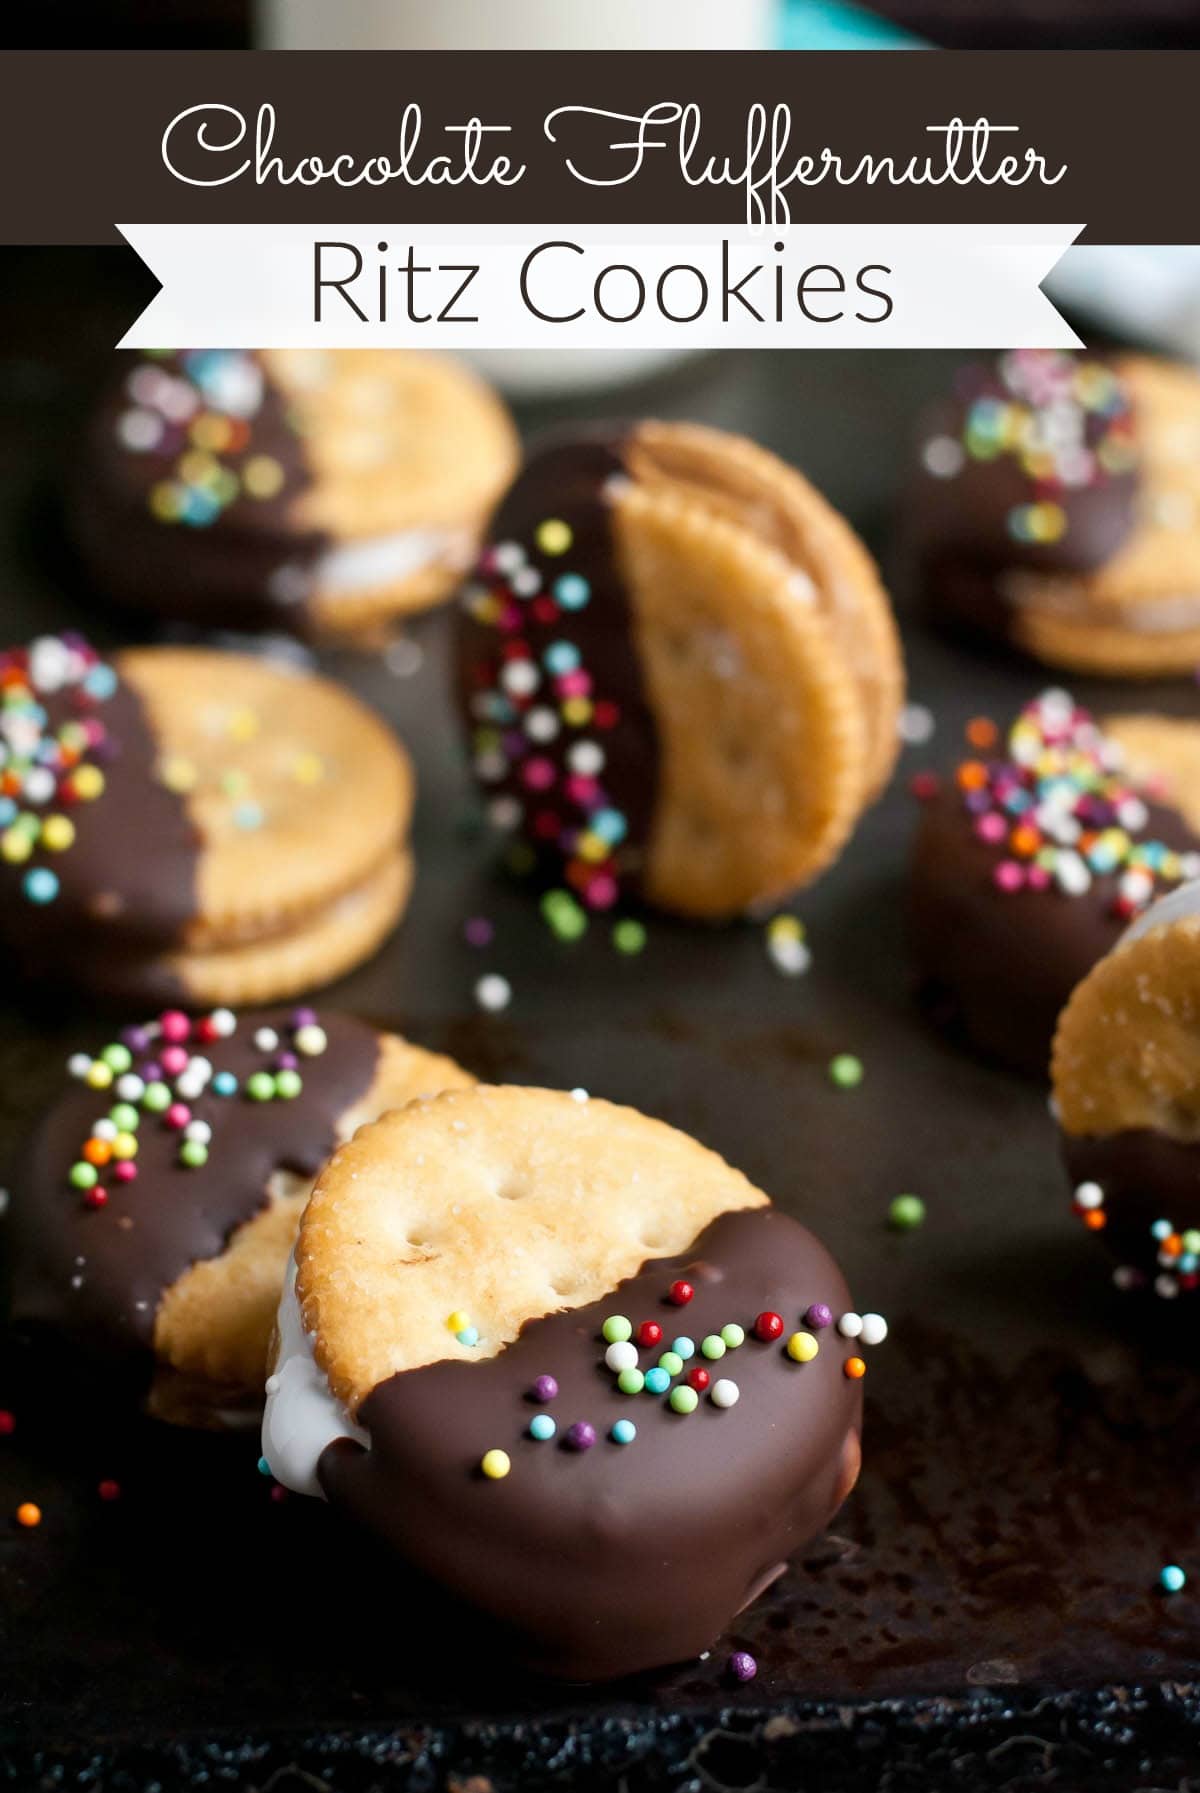 These Chocolate Dipped Ritz Cookies stuffed with peanut butter and marshmallow are so easy to make and a huge hit at parties!